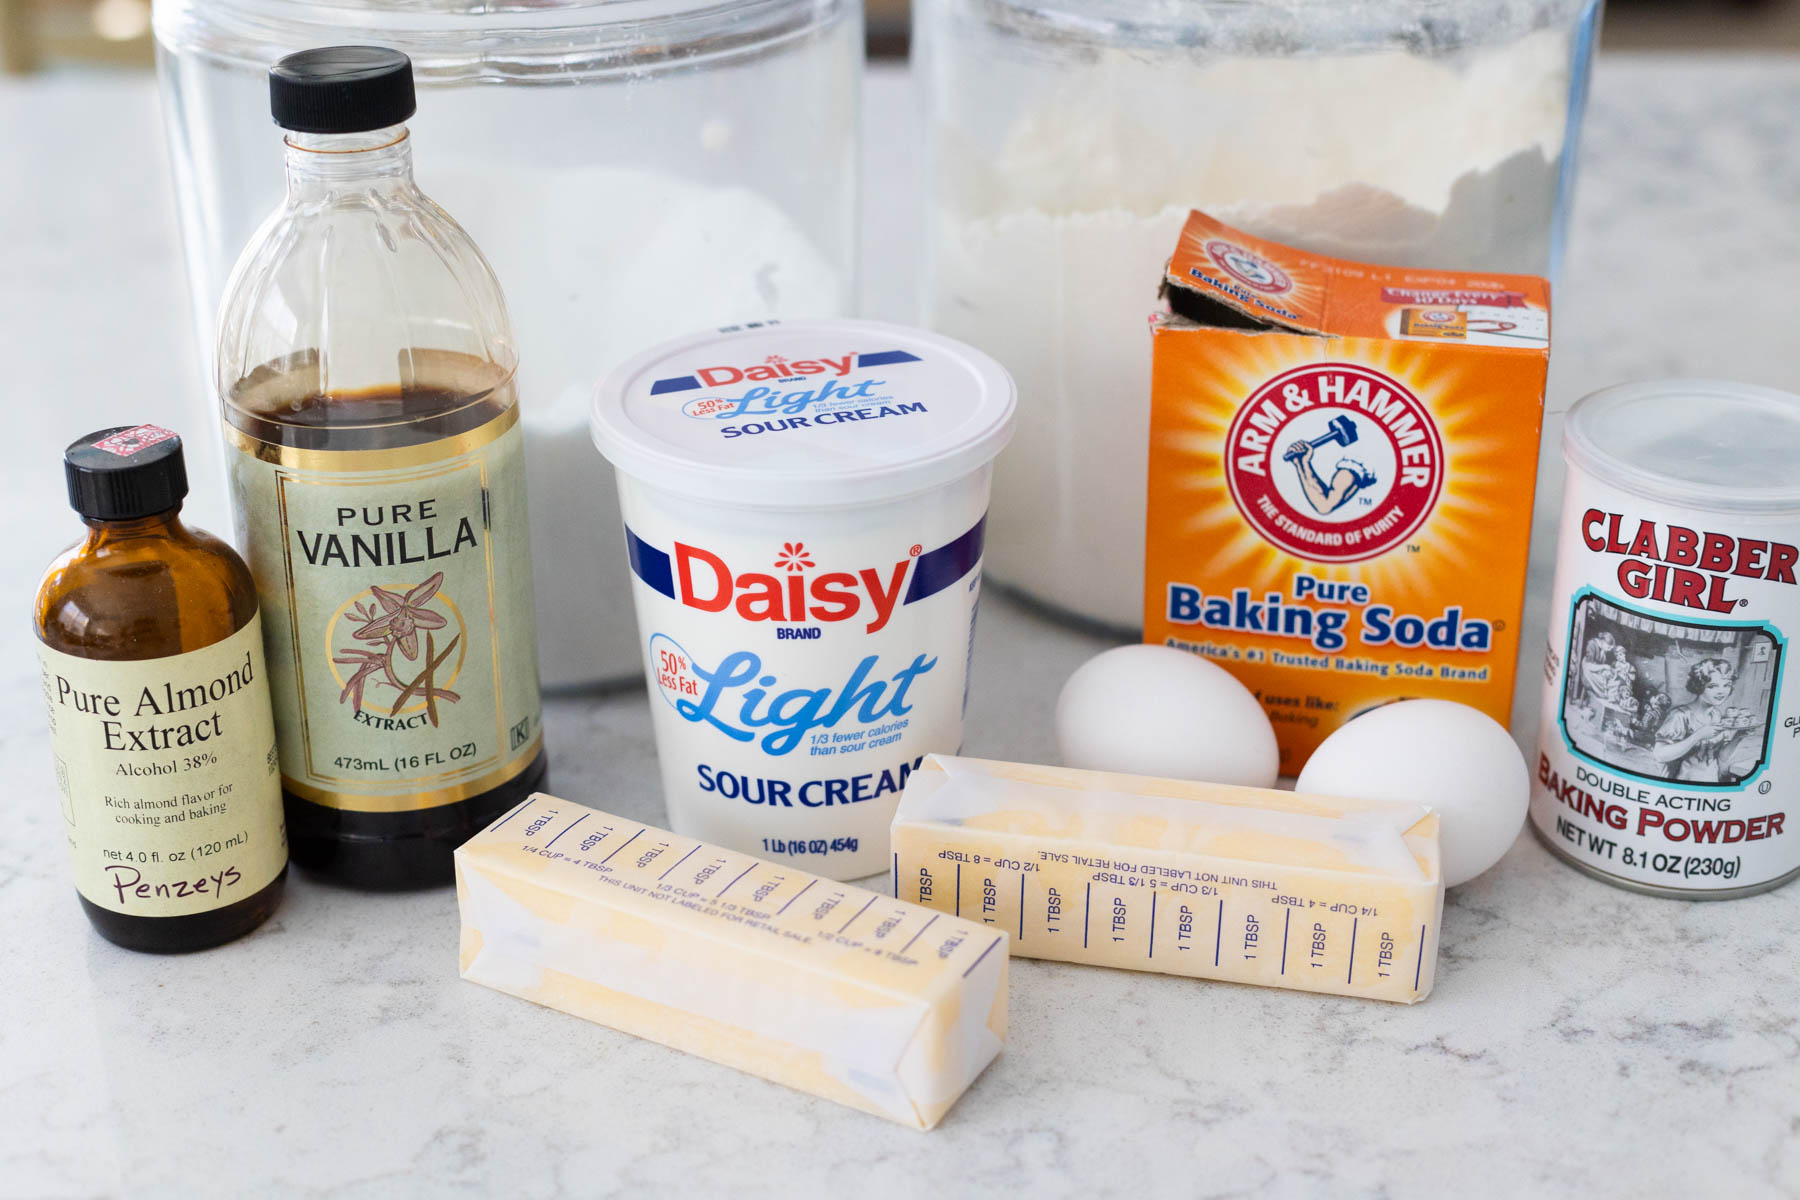 The ingredients to make soft sugar cookies with frosting are on the counter.